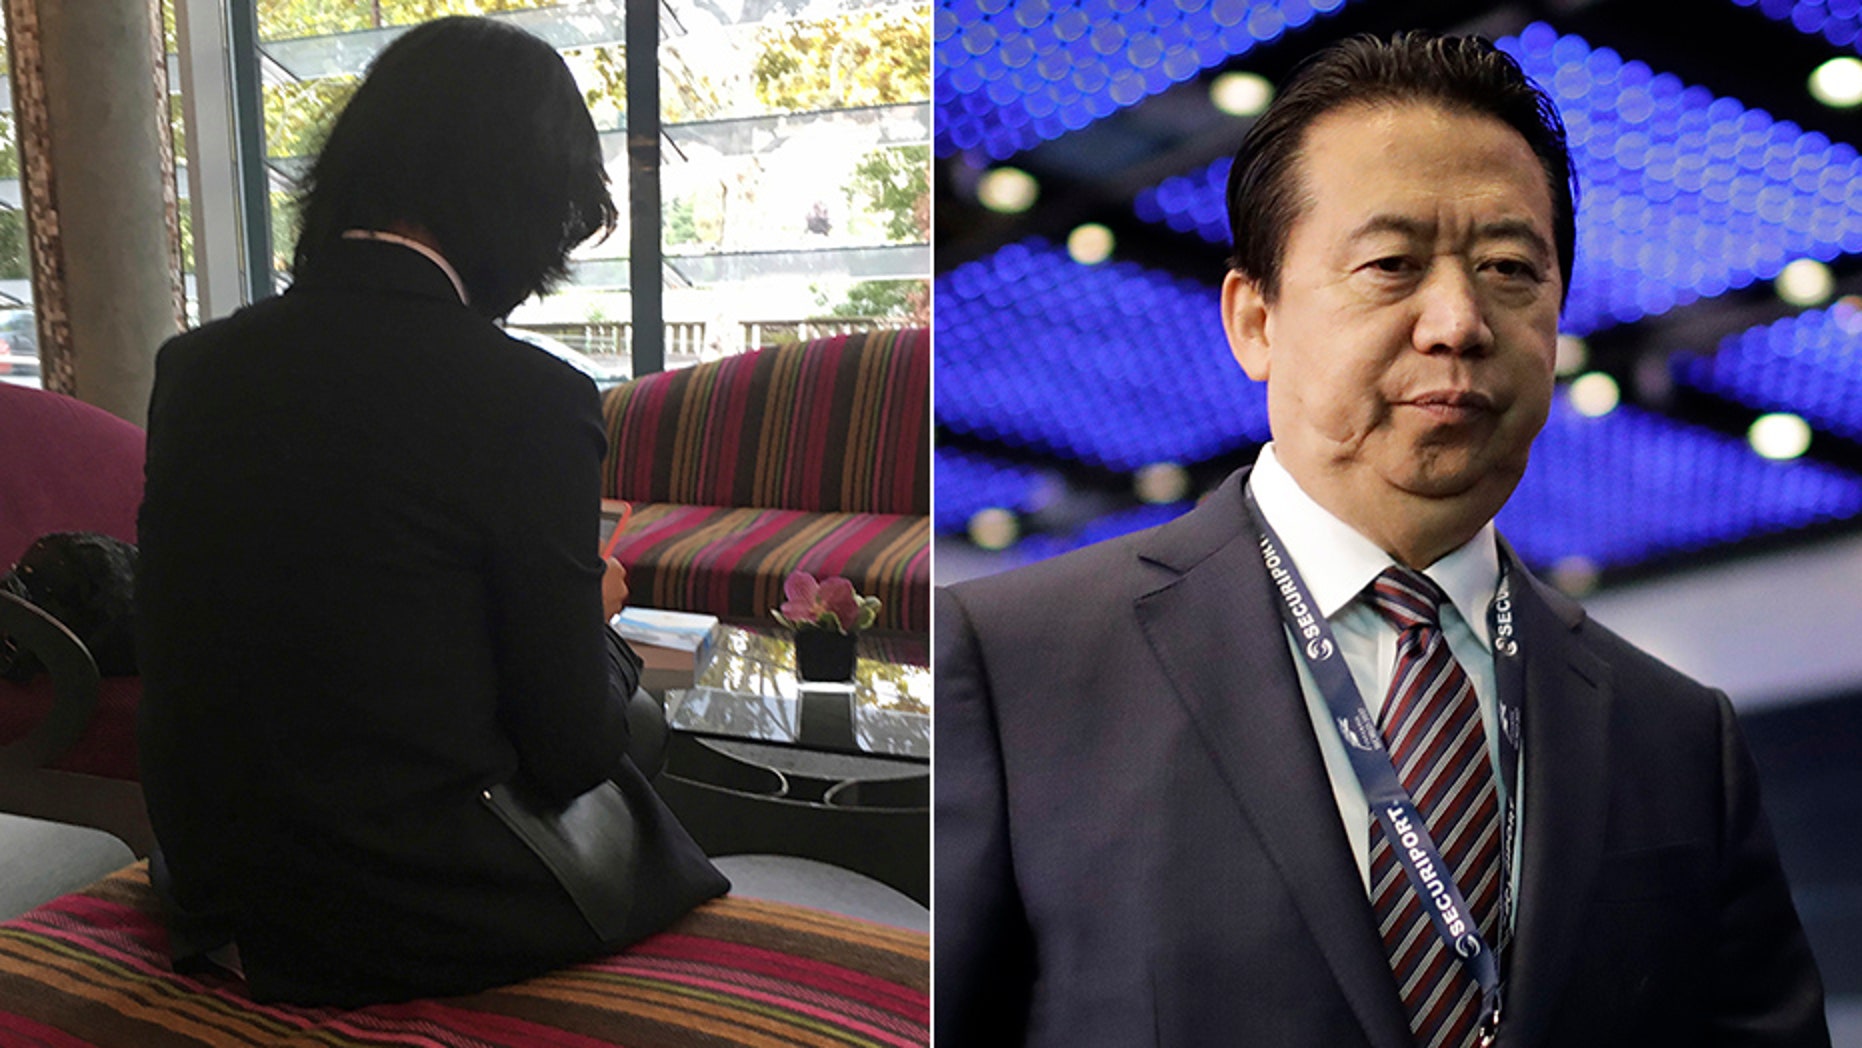 Grace Meng, left, the wife of missing Interpol President Meng Hongwei, who does not want her face shown, says he last sent her a picture of a knife before falling out of contact in late September.